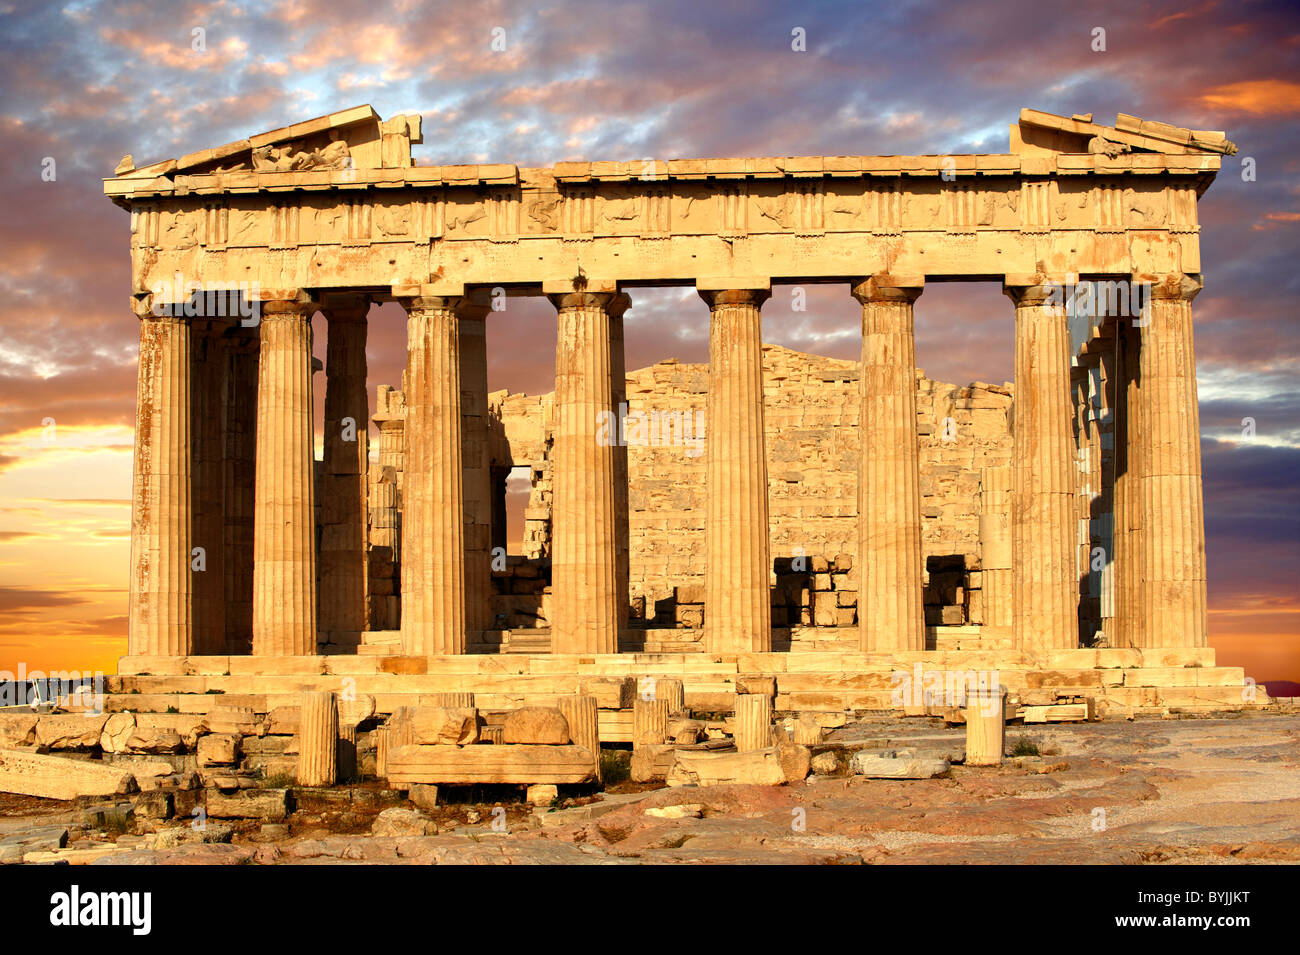 The Parthenon Temple ancient greek temple, the Acropolis of Athens in Greece. Stock Photo